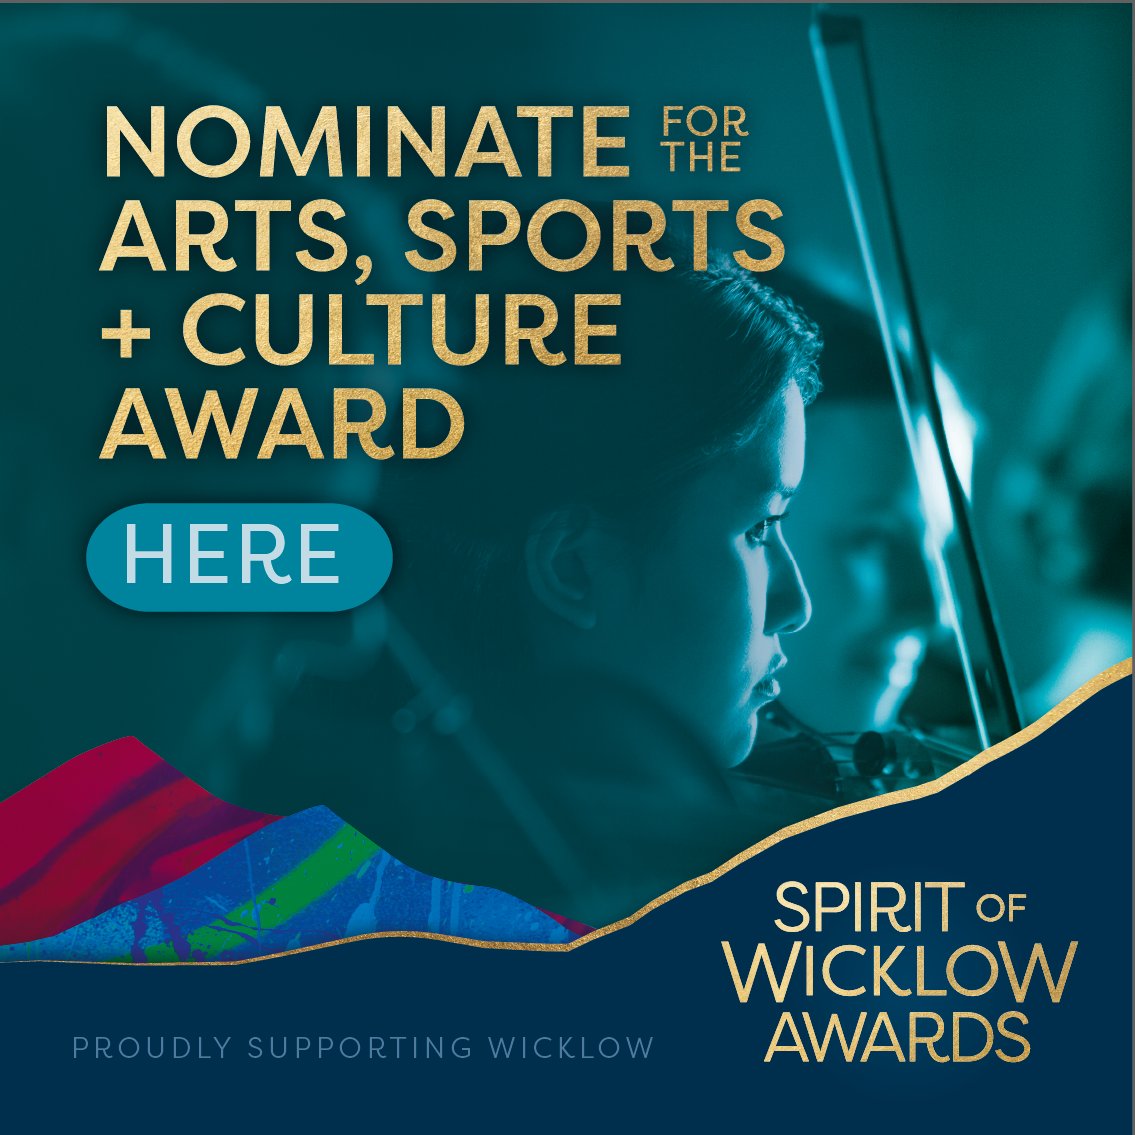 Nominate for our Arts, Sport & Culture Award: This category provides an opportunity to recognise those who excel in arts, sports & culture, large or small.

Nominations close May 31st: 8ypmvoy8xag.typeform.com/SpiritOfWicklow

#SpiritOfWicklow #PowerscourtDistillery